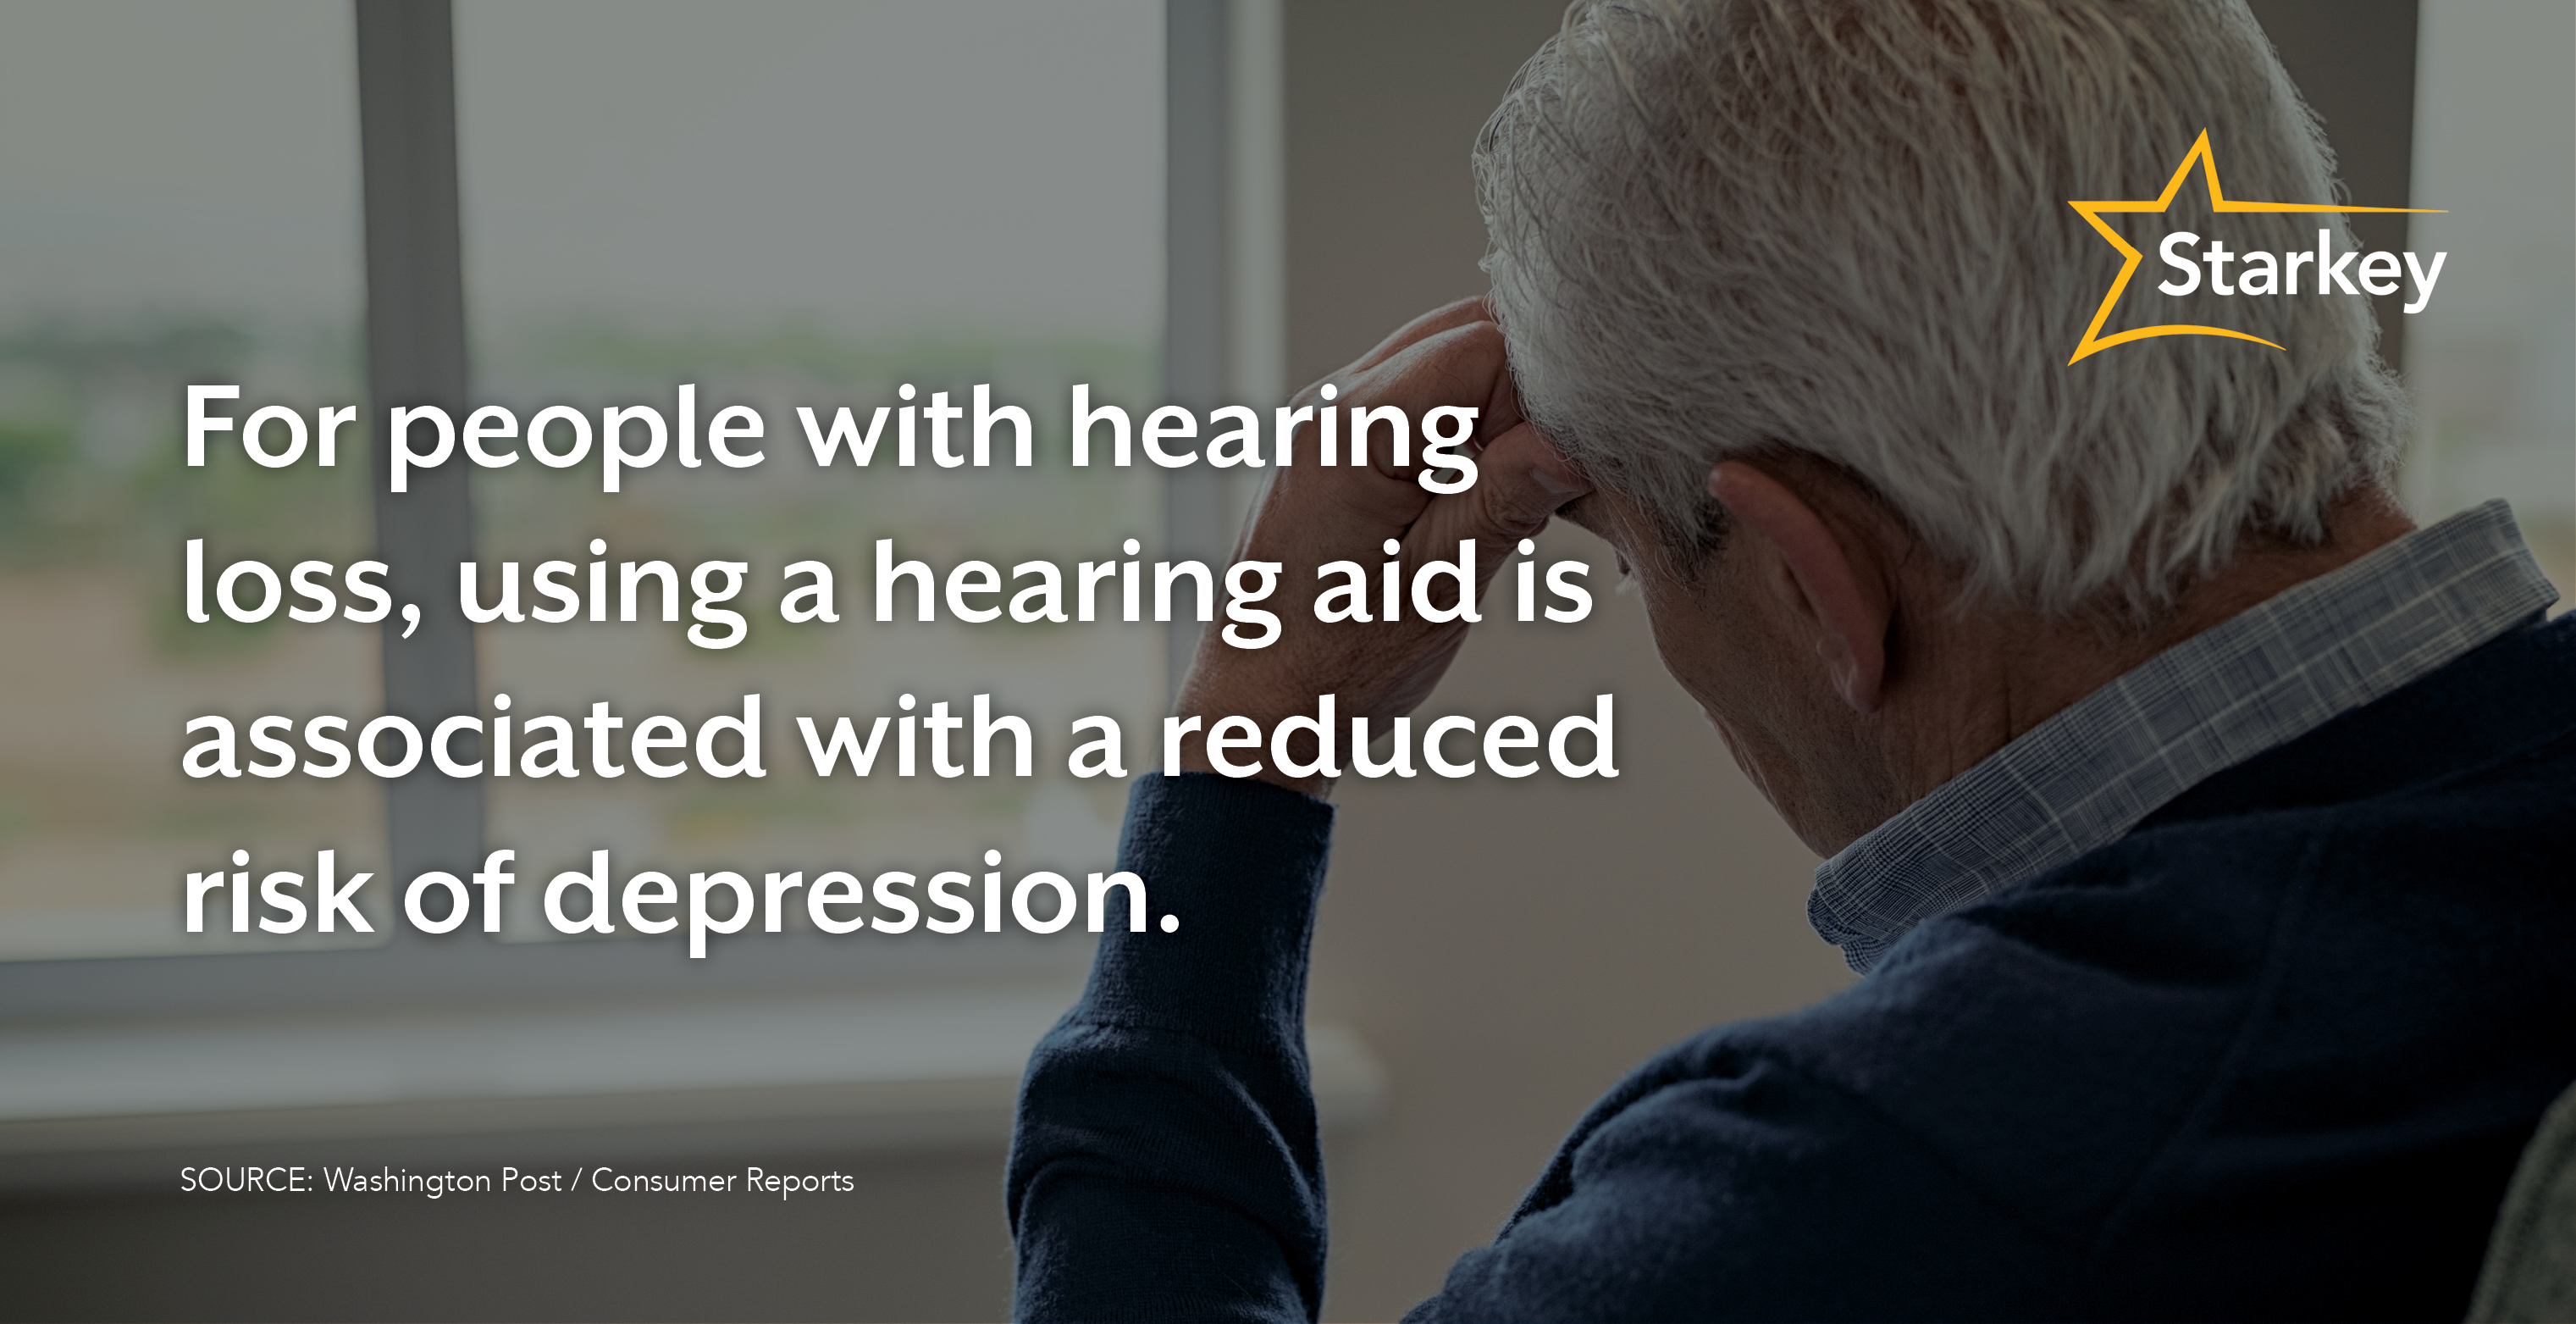 Quote saying that hearing aids are associated with a reduced risk of depression. Man looking depressed in background.